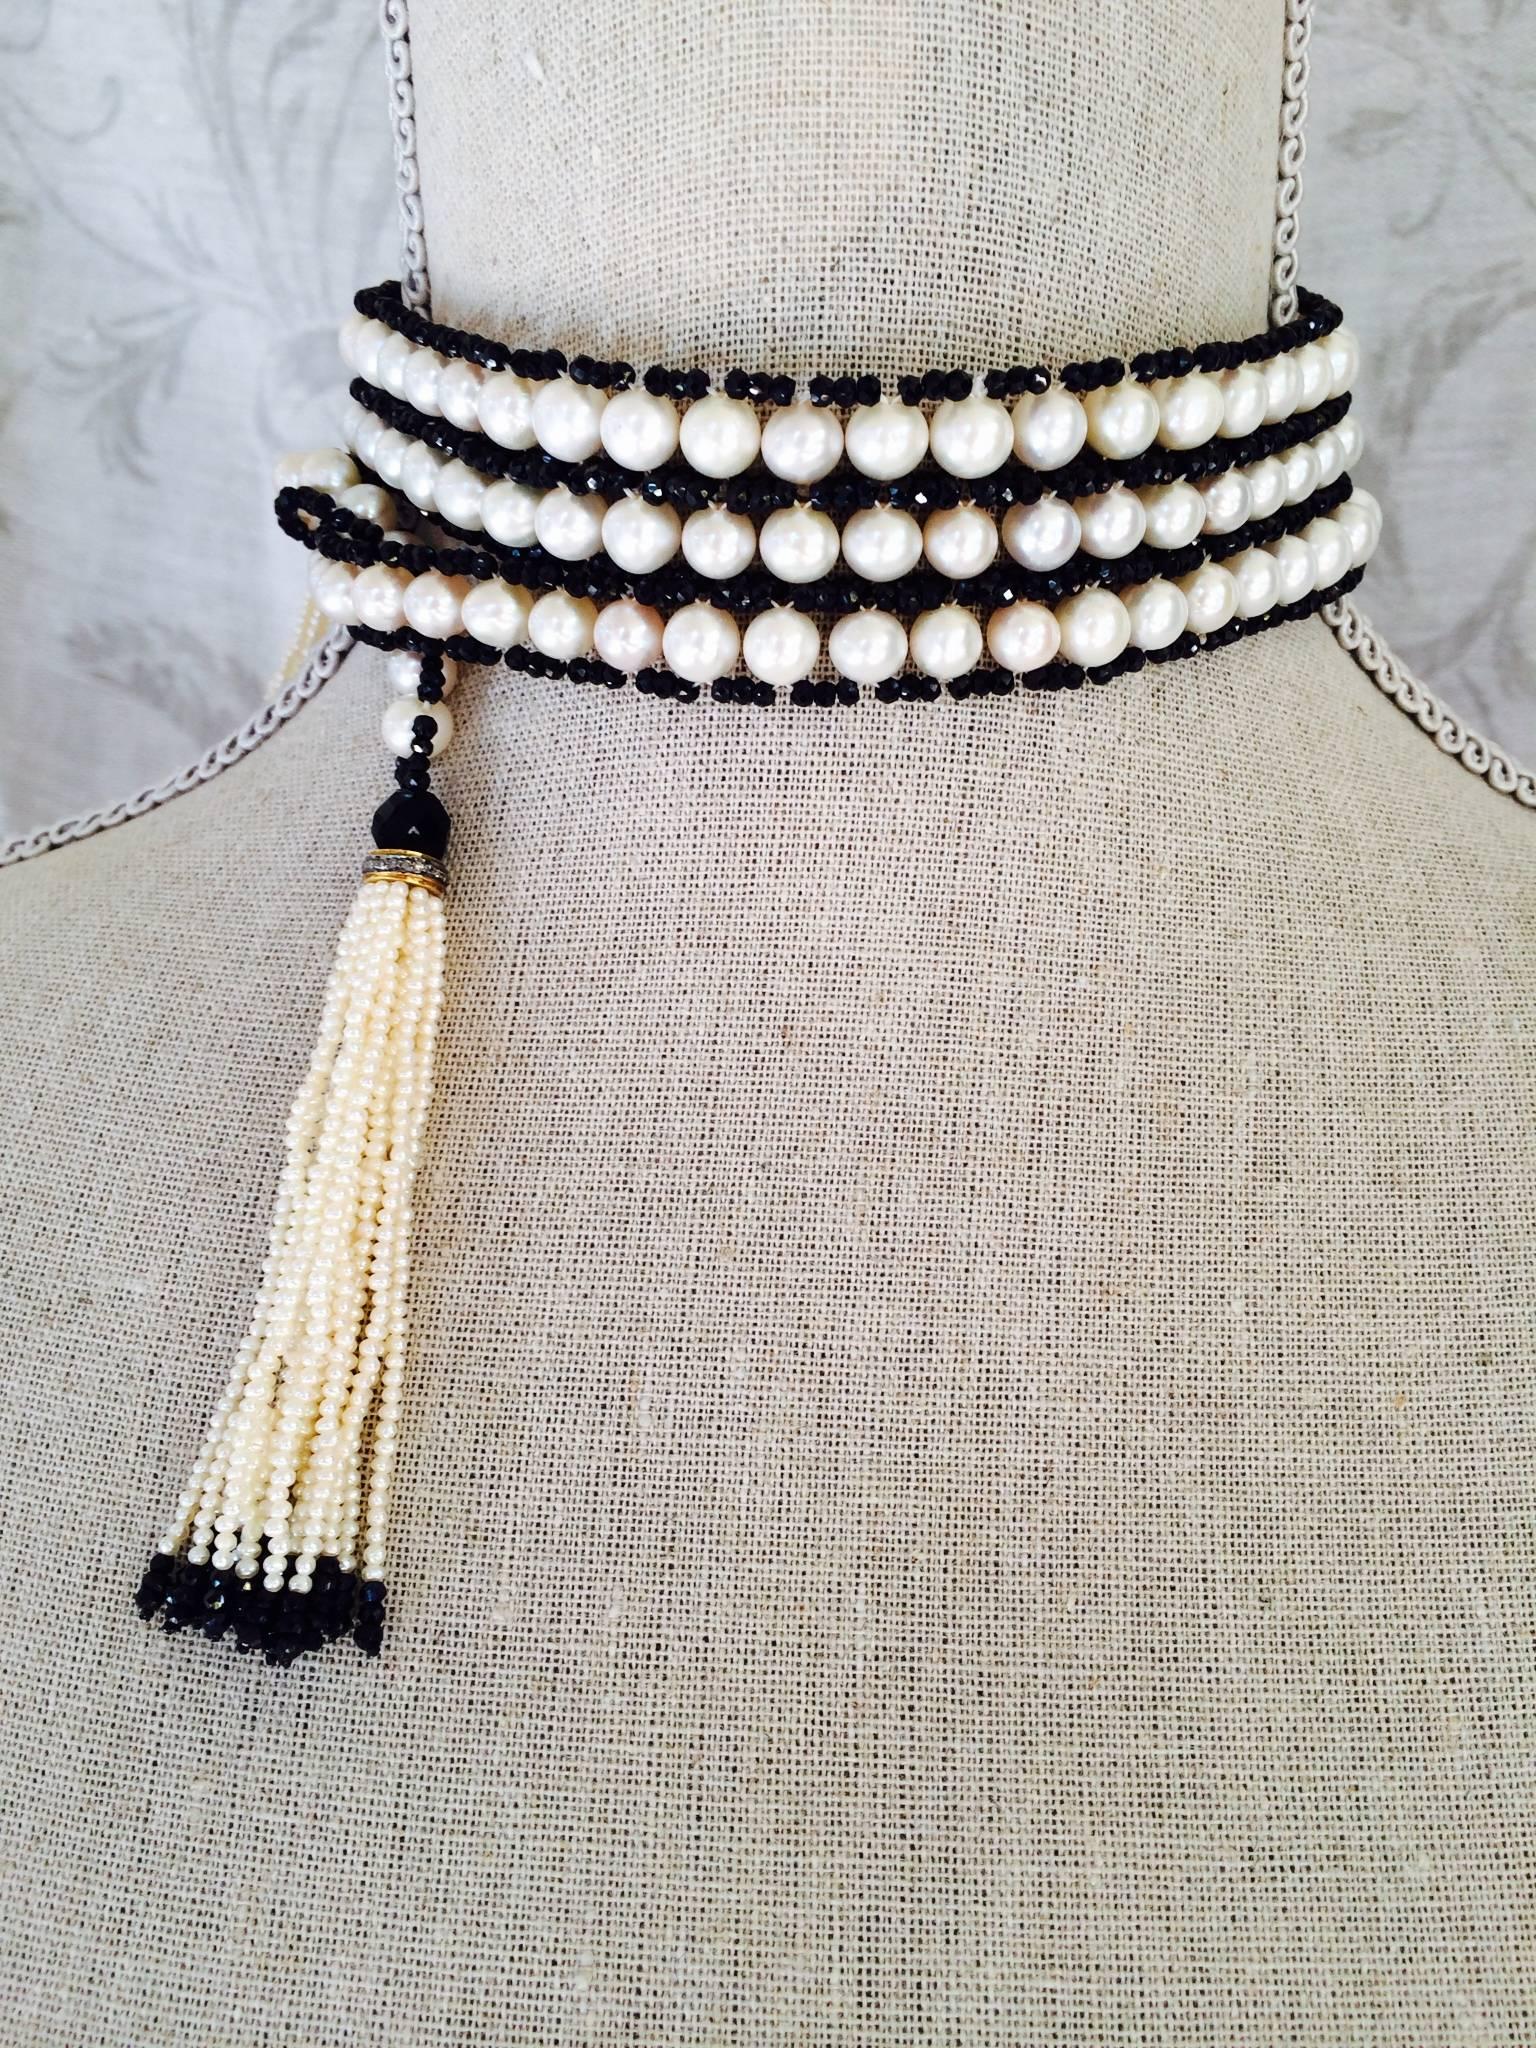 Woven White Pearl, Faceted Black Spinel, and Onyx Beaded Sautoir by Marina J  2